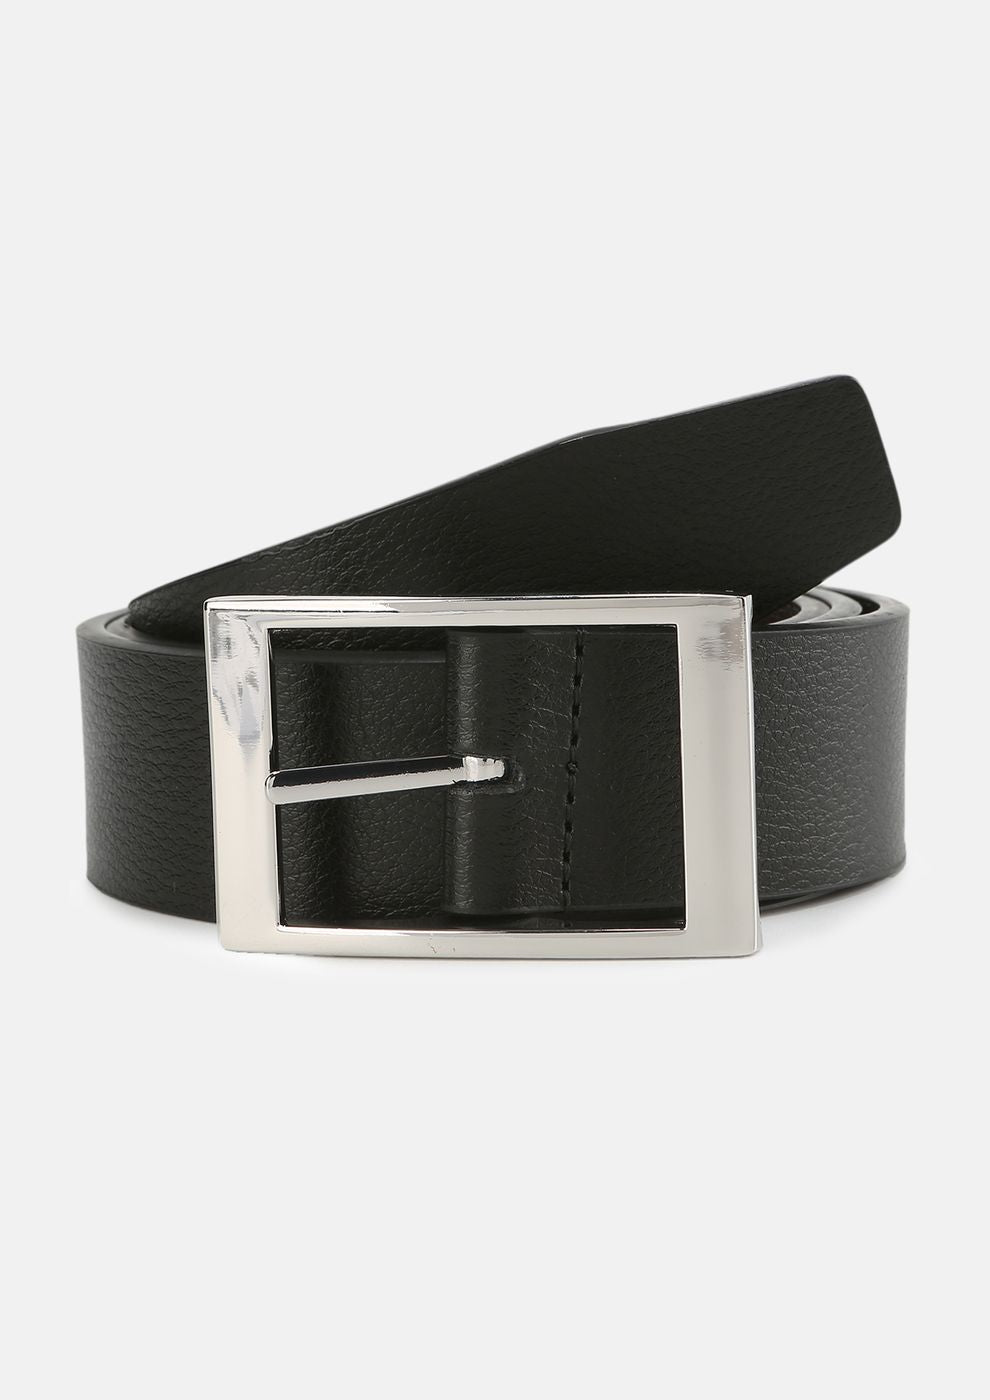 GIANNI FERAUD Dawson Grained Brown and Black Leather Reversible Belt